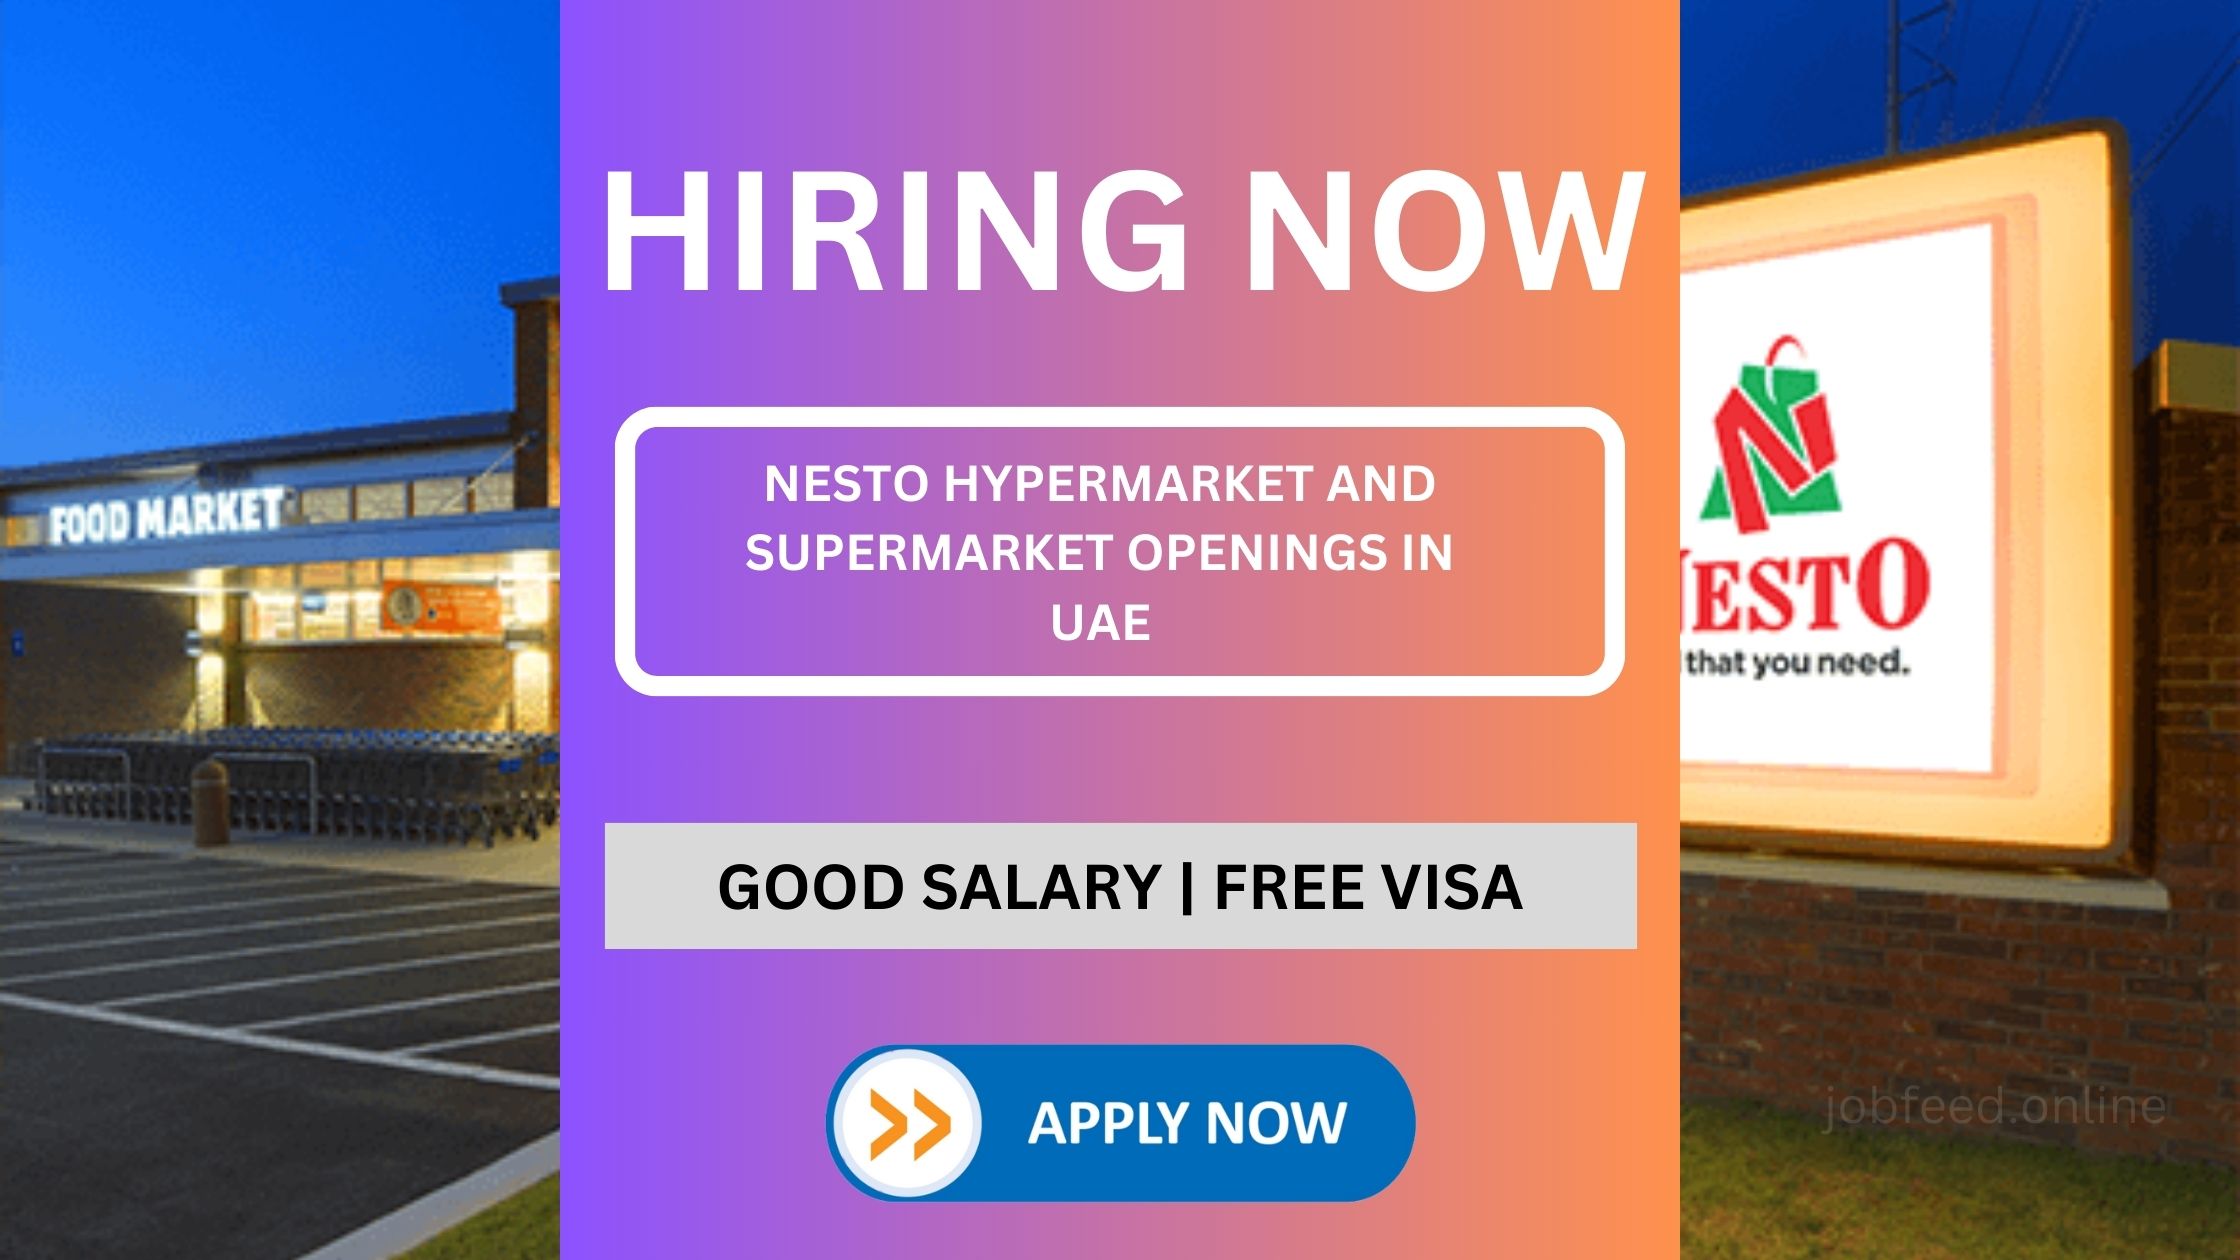 Current Nesto Hypermarket And Supermarket Openings In UAE